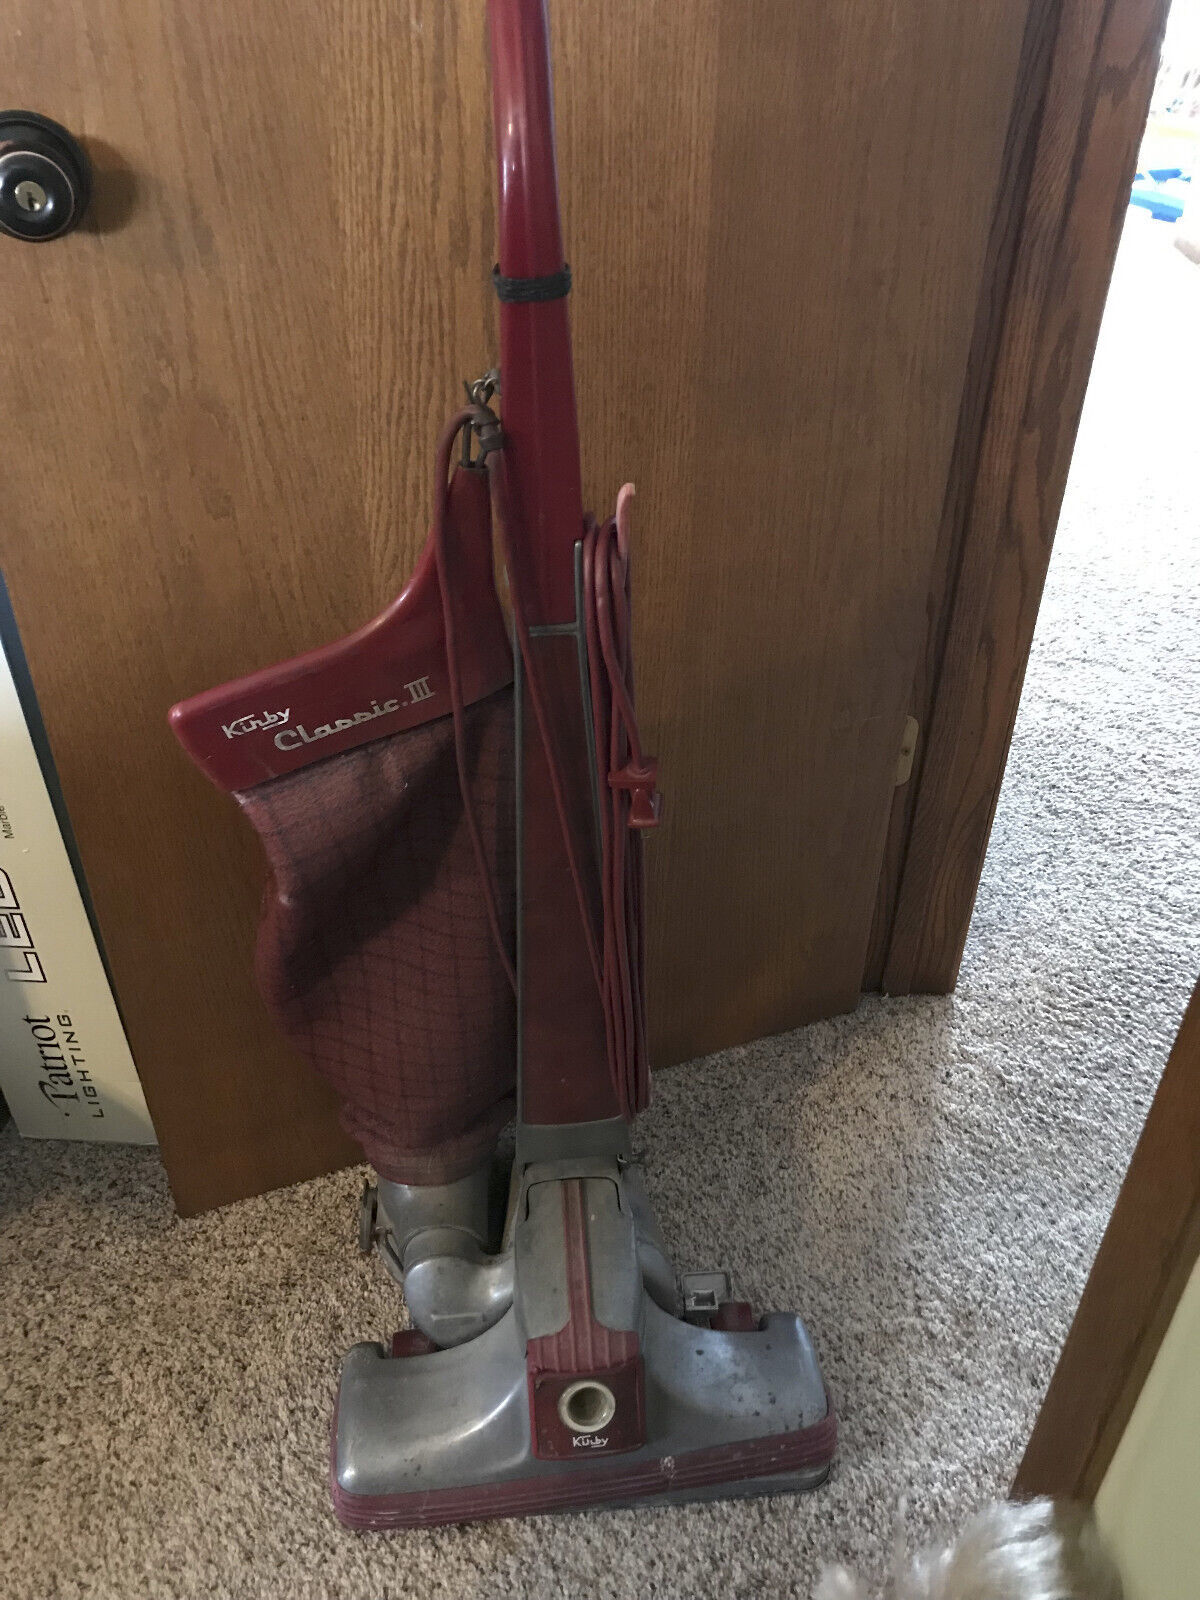 Kirby Generation 3 Model G3D Upright Vacuum Cleaner with Attachments